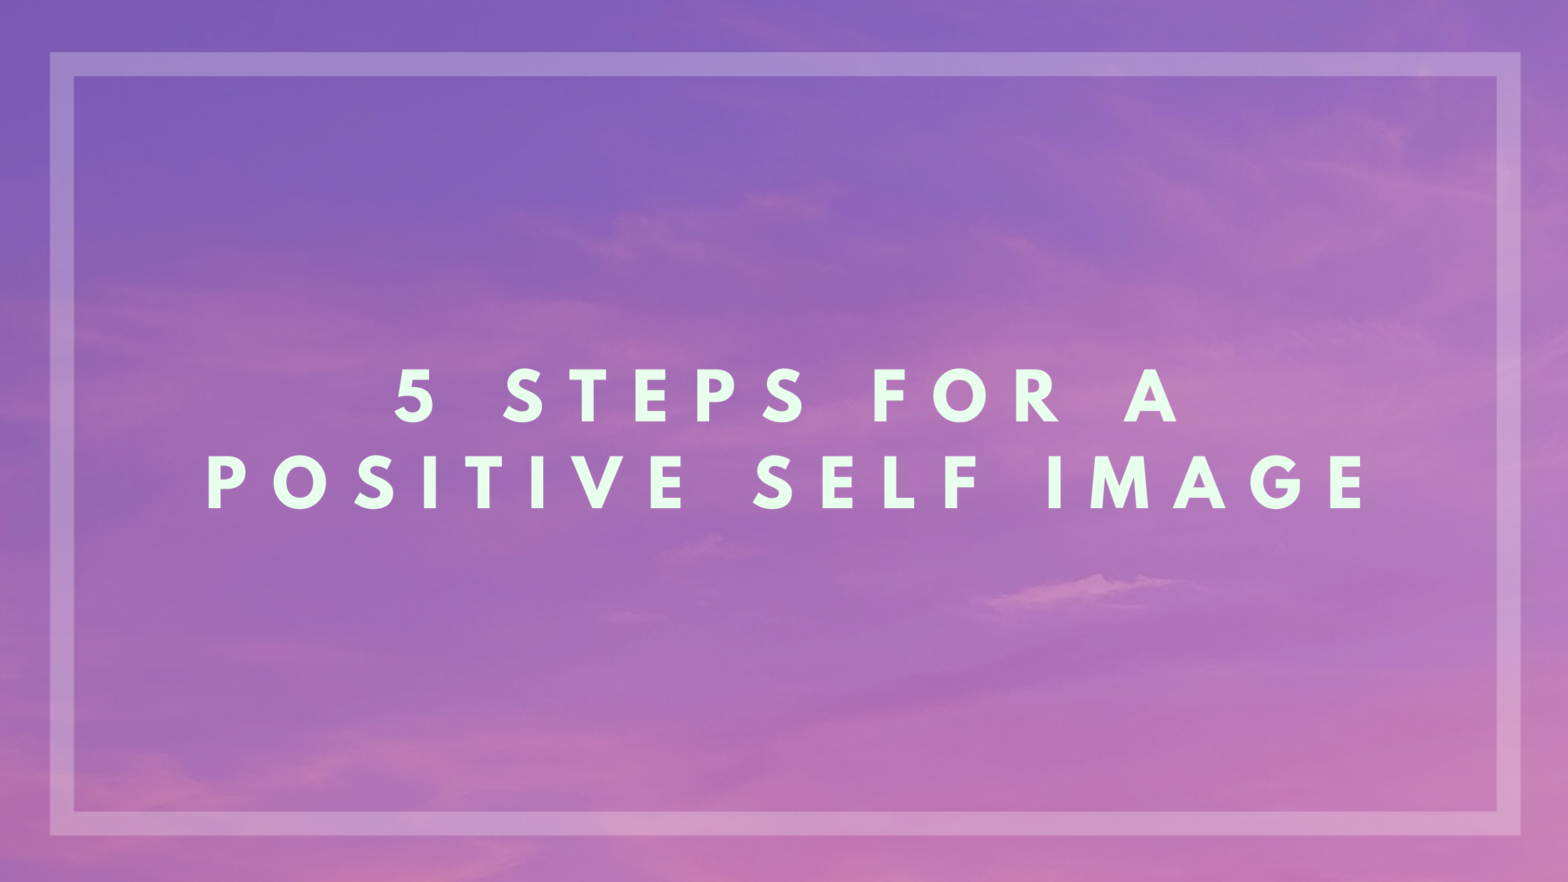 5 Steps For A Positive Self Image